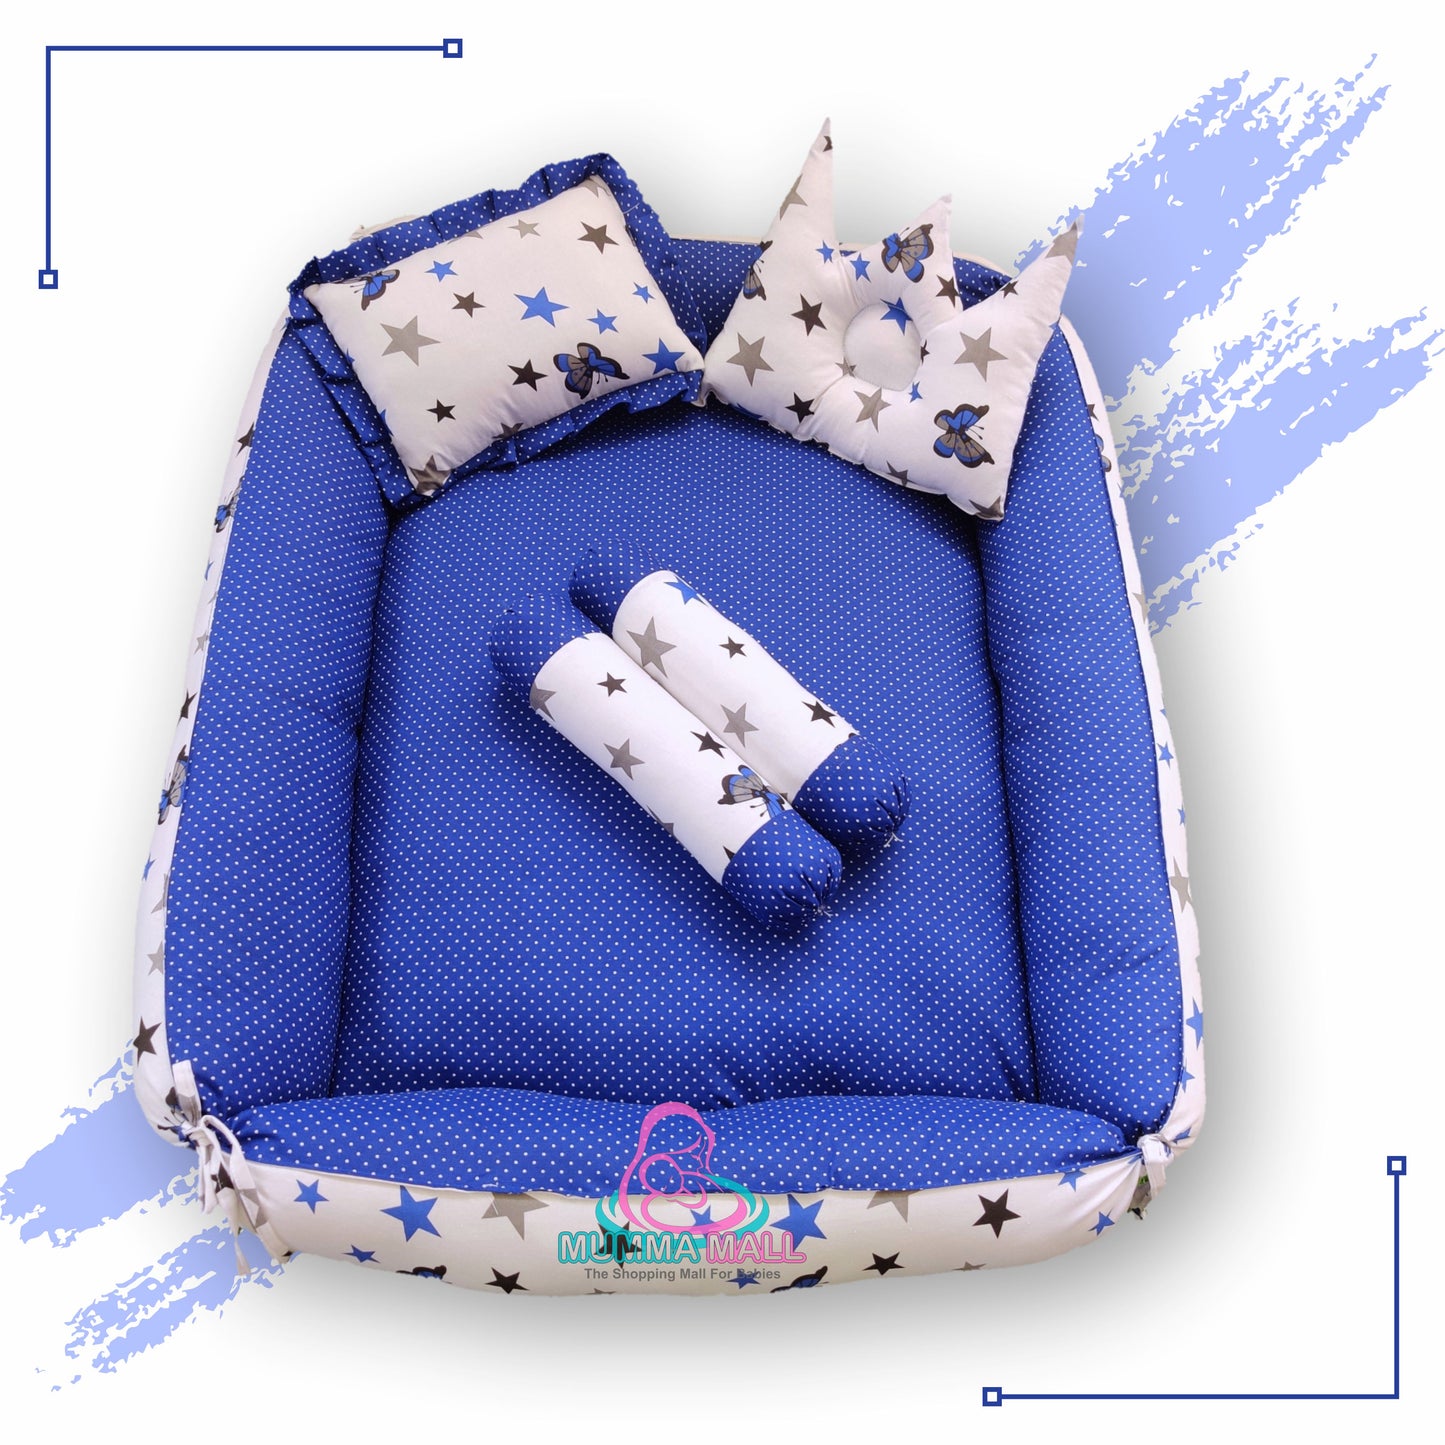 Baby box mattress with blanket and set of 4 pillows as neck support, side support and toy (Blue and White)